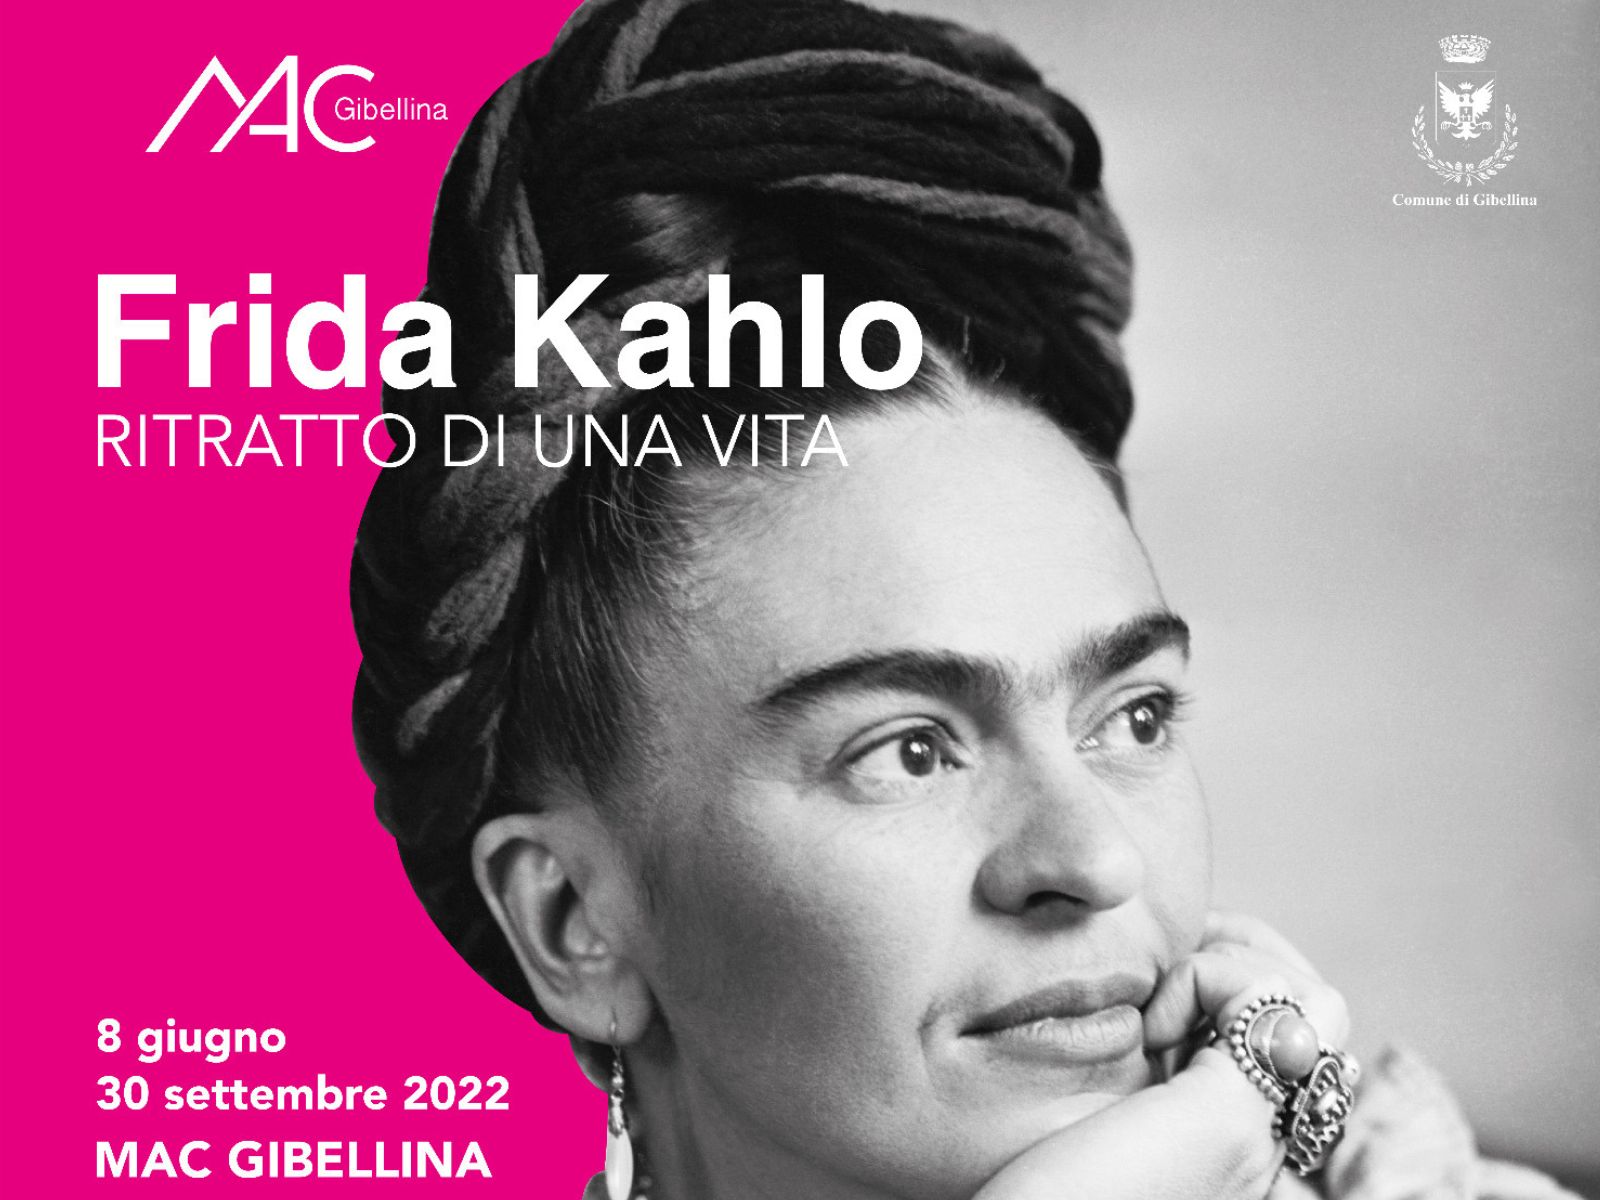 Frida Kahlo, portrait of a life: the photographic exhibition